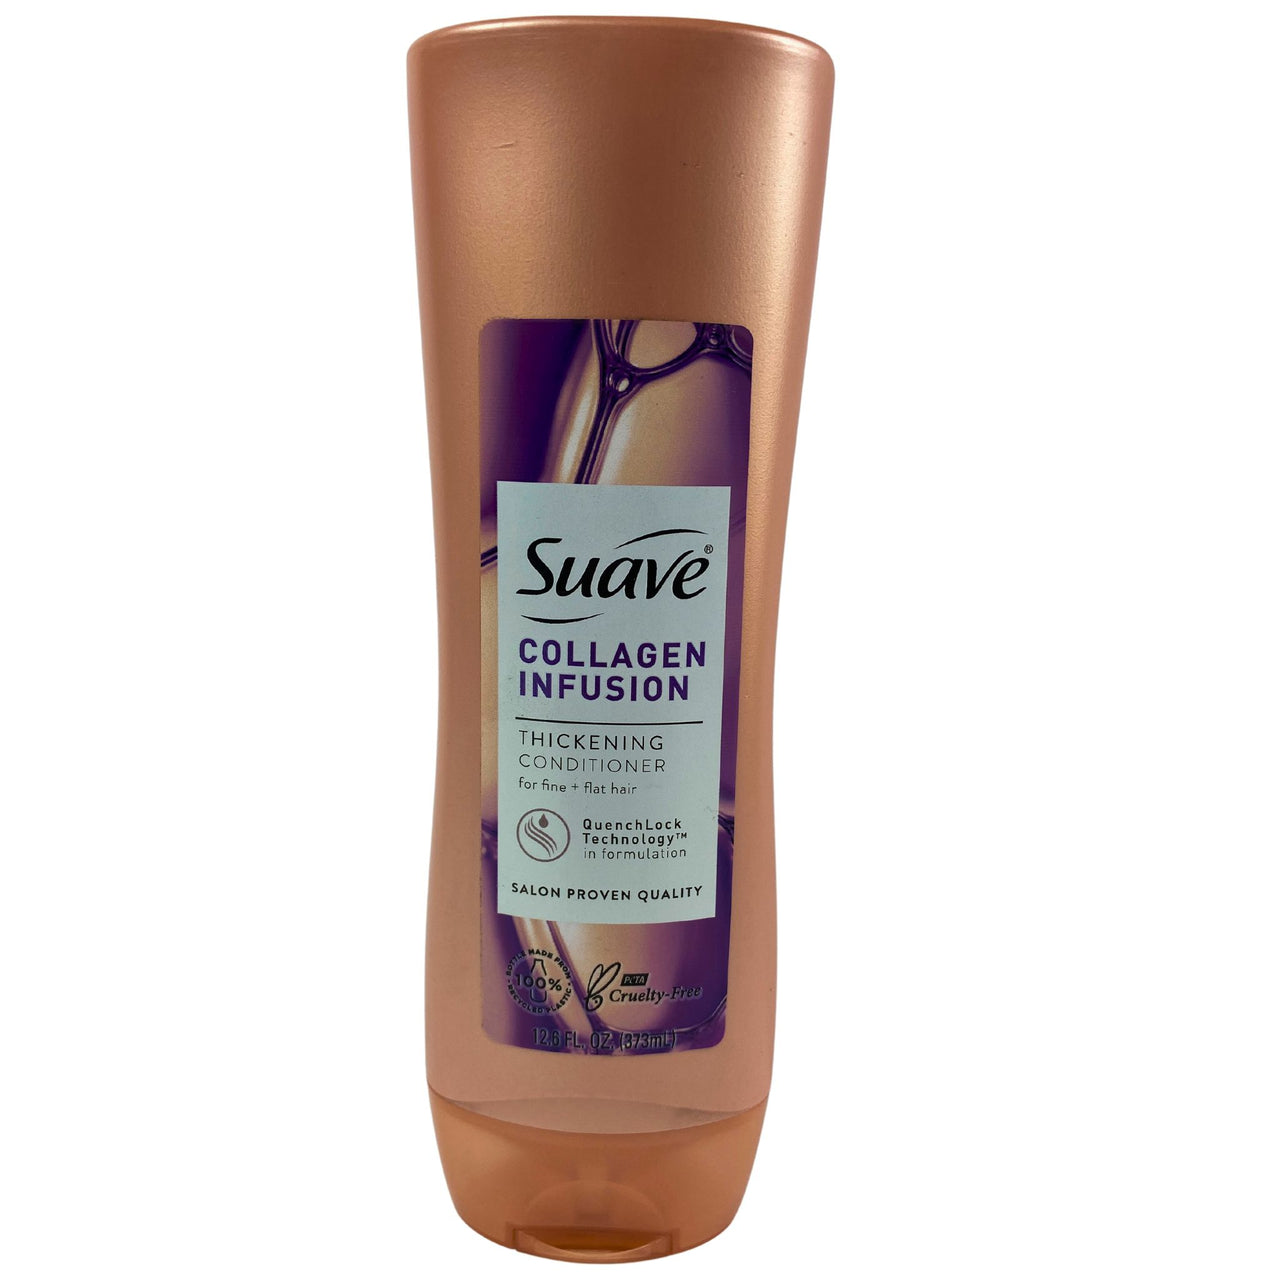 Suave Collagen Infusion Thickening Conditioner for fine + flat hair 